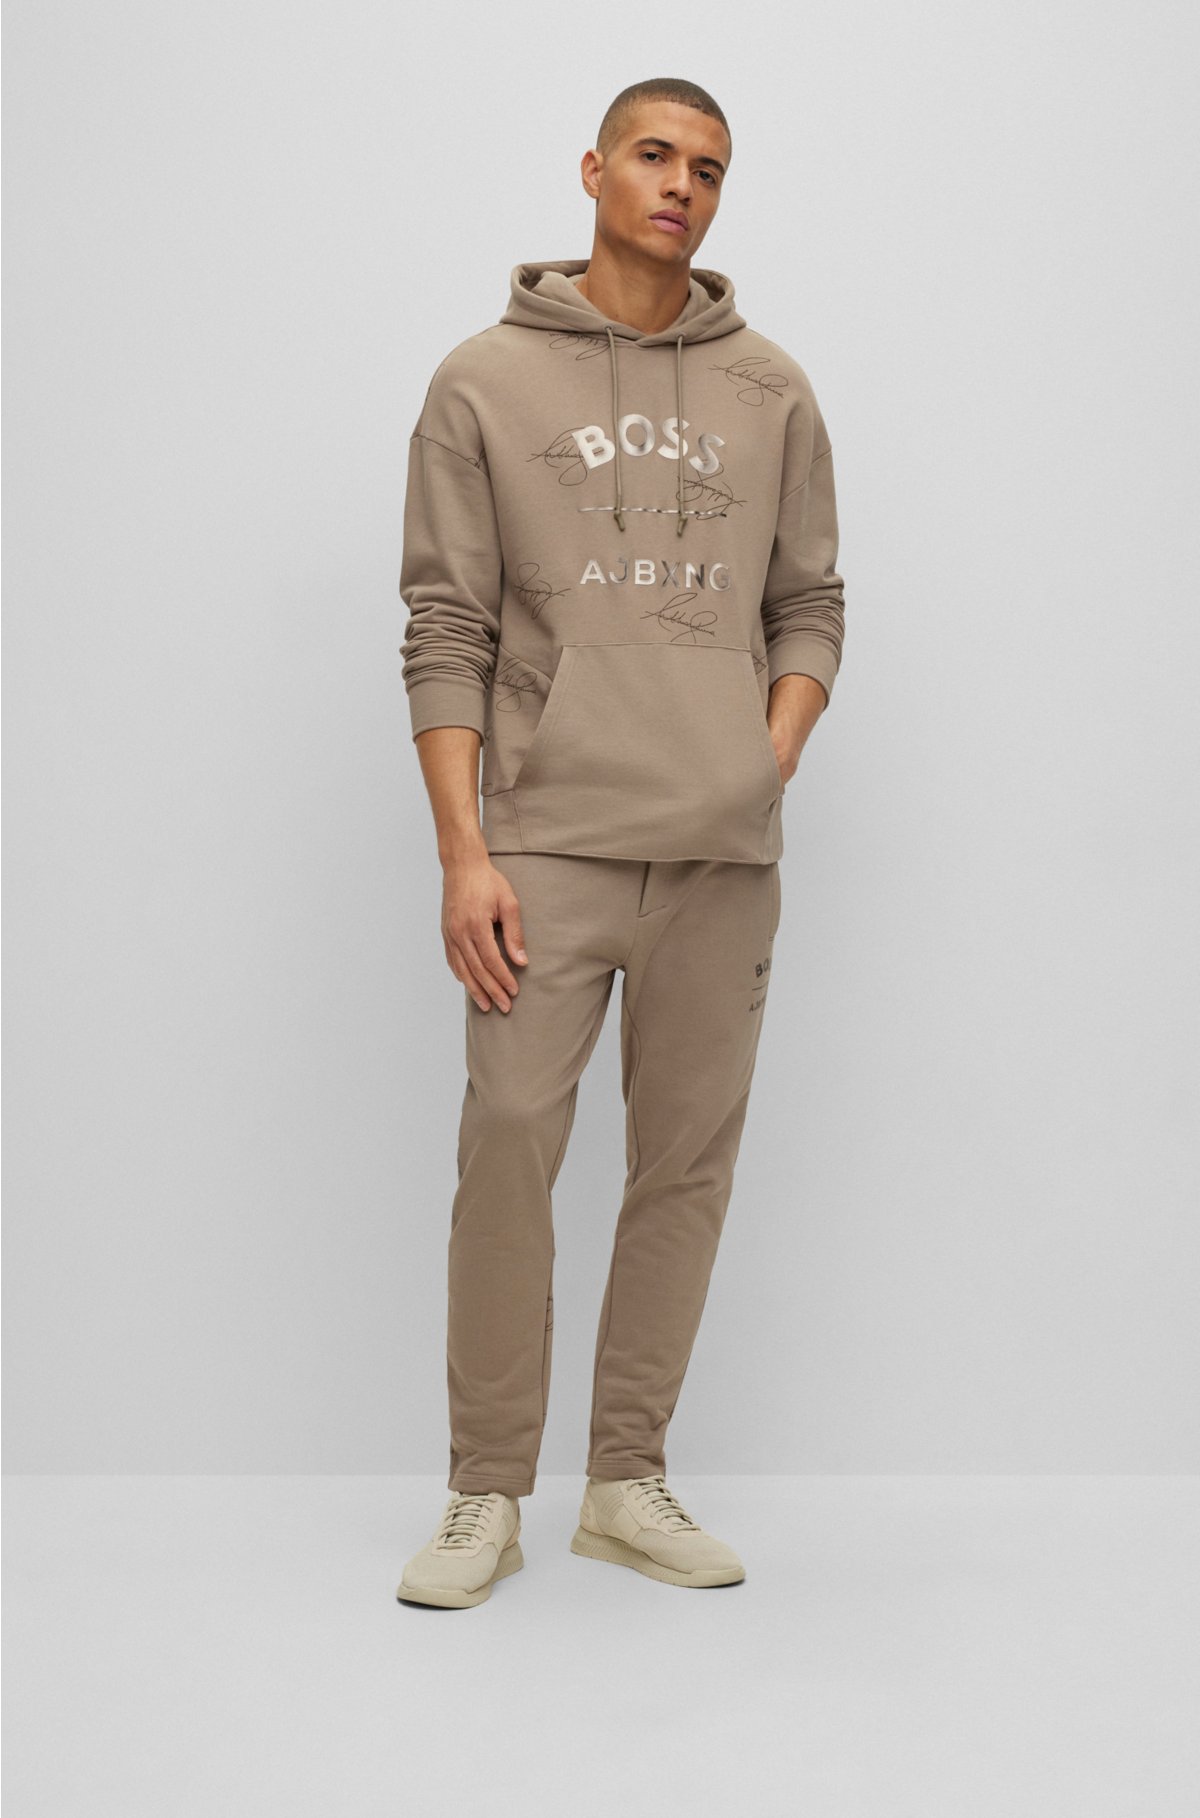 BOSS cotton hoodie collaborative AJBXNG branding x - BOSS with relaxed-fit